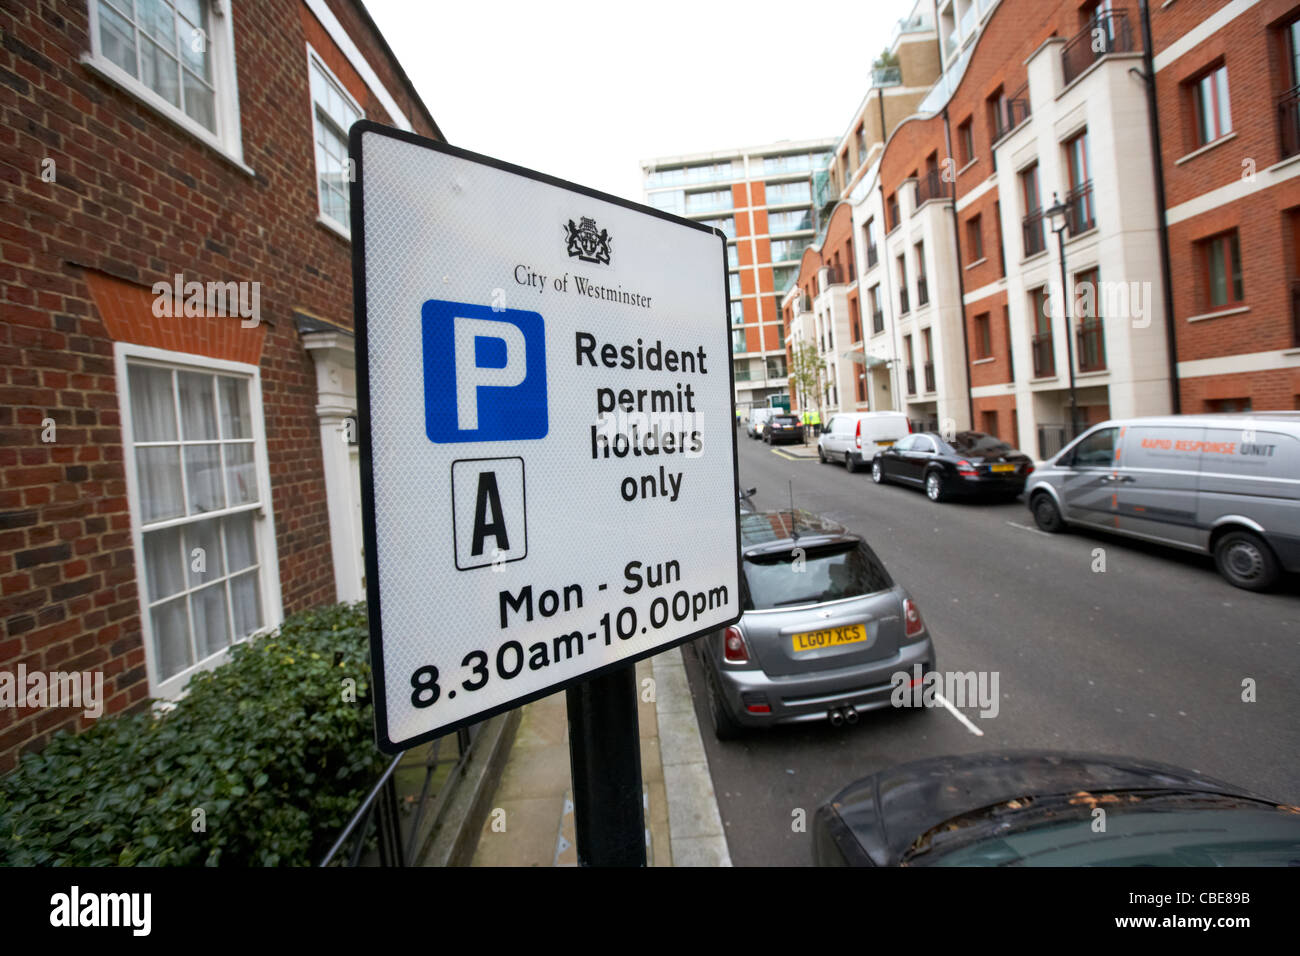 city of westminster resident permit holders only sign in knightsbridge London England Uk United Kingdom Stock Photo